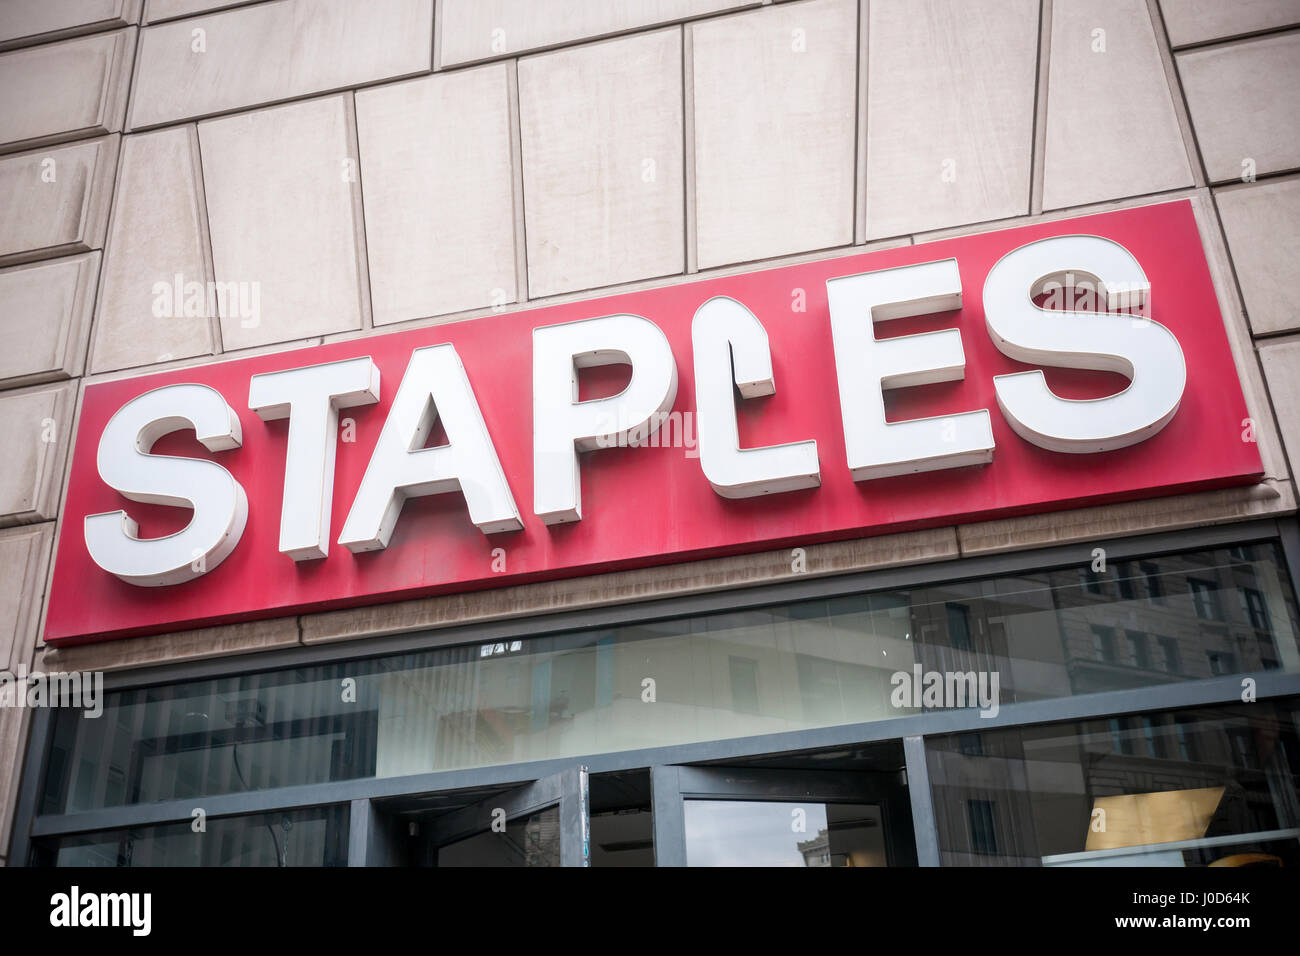 A Staples Office Supply Store In Lower Manhattan In New York On Wednesday J0D64K 